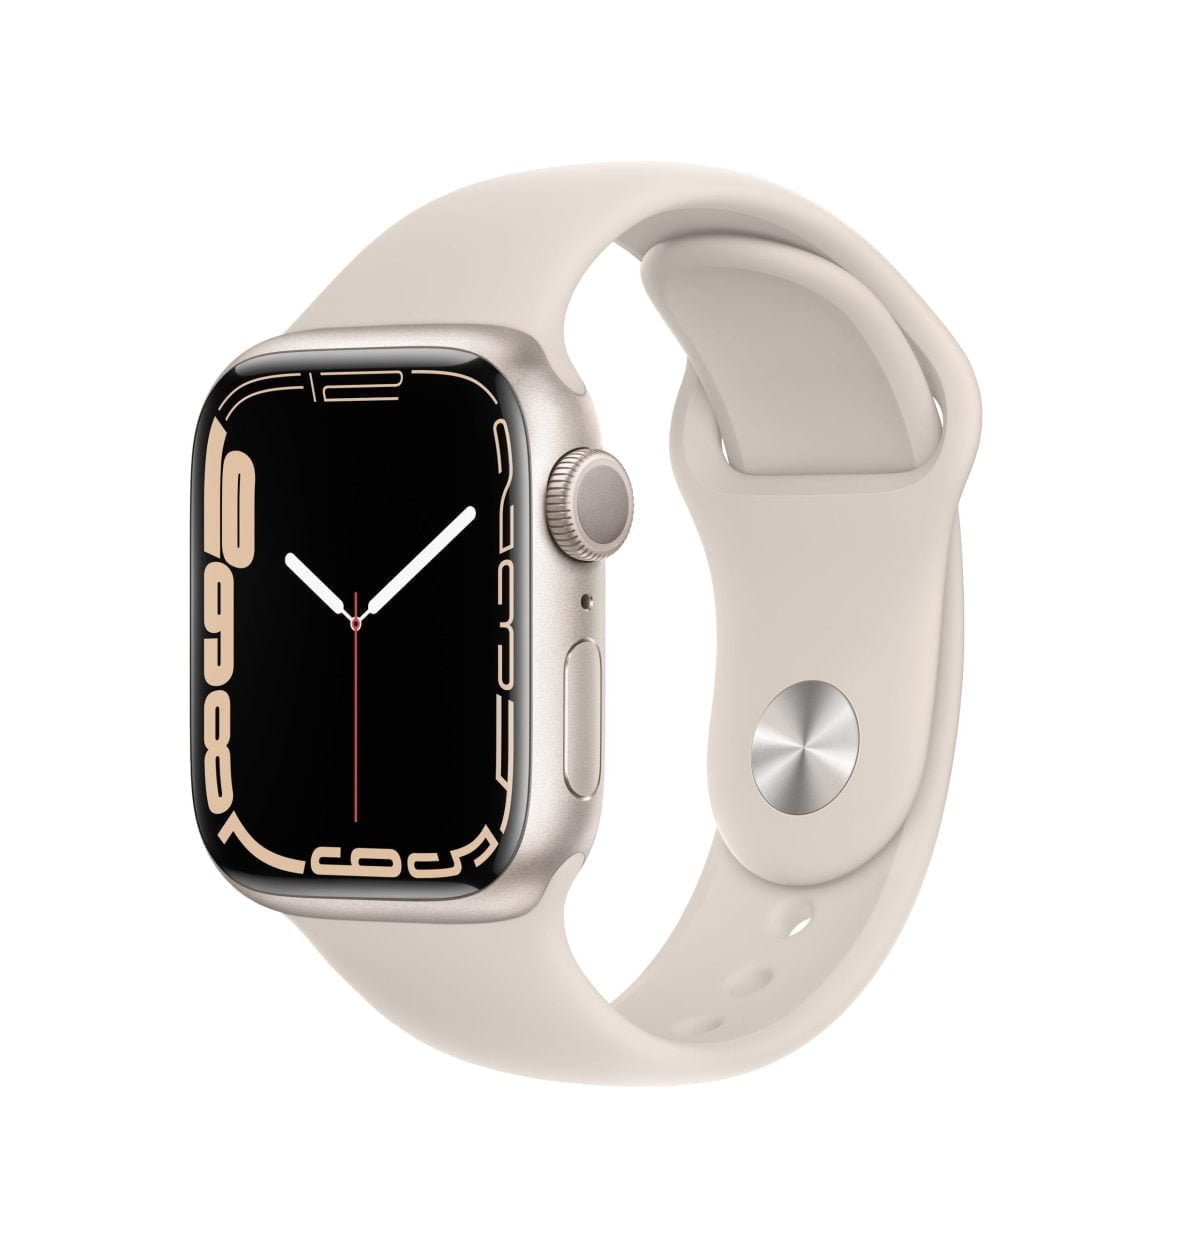 6215933 Sd Scaled Apple &Amp;Lt;H1&Amp;Gt;Apple Watch Series 7 (Gps) 41Mm Starlight Aluminum Case With Starlight Sport Band - Starlight&Amp;Lt;/H1&Amp;Gt; &Amp;Lt;H2&Amp;Gt;Model : Mkmy3&Amp;Lt;/H2&Amp;Gt; &Amp;Lt;Div Class=&Amp;Quot;Long-Description-Container Body-Copy &Amp;Quot;&Amp;Gt; &Amp;Lt;Div Class=&Amp;Quot;Html-Fragment&Amp;Quot;&Amp;Gt; &Amp;Lt;Div&Amp;Gt; &Amp;Lt;Div&Amp;Gt;The Largest, Most Advanced Always-On Retina Display Yet Makes Everything You Do With Your Apple Watch Series 7 Bigger And Better. Series 7 Is The Most Durable Apple Watch Ever Built, With An Even More Crack-Resistant Front Crystal. Advanced Features Let You Measure Your Blood Oxygen Level,¹ Take An Ecg Anytime,² And Access Mindfulness And Sleep Tracking Apps. You Can Also Track Dozens Of Workouts, Including New Tai Chi And Pilates.&Amp;Lt;/Div&Amp;Gt; &Amp;Lt;/Div&Amp;Gt; &Amp;Lt;/Div&Amp;Gt; &Amp;Lt;/Div&Amp;Gt; Apple Watch Series 7 (Gps) 41Mm Starlight Aluminum Case With Starlight Sport Band - Starlight